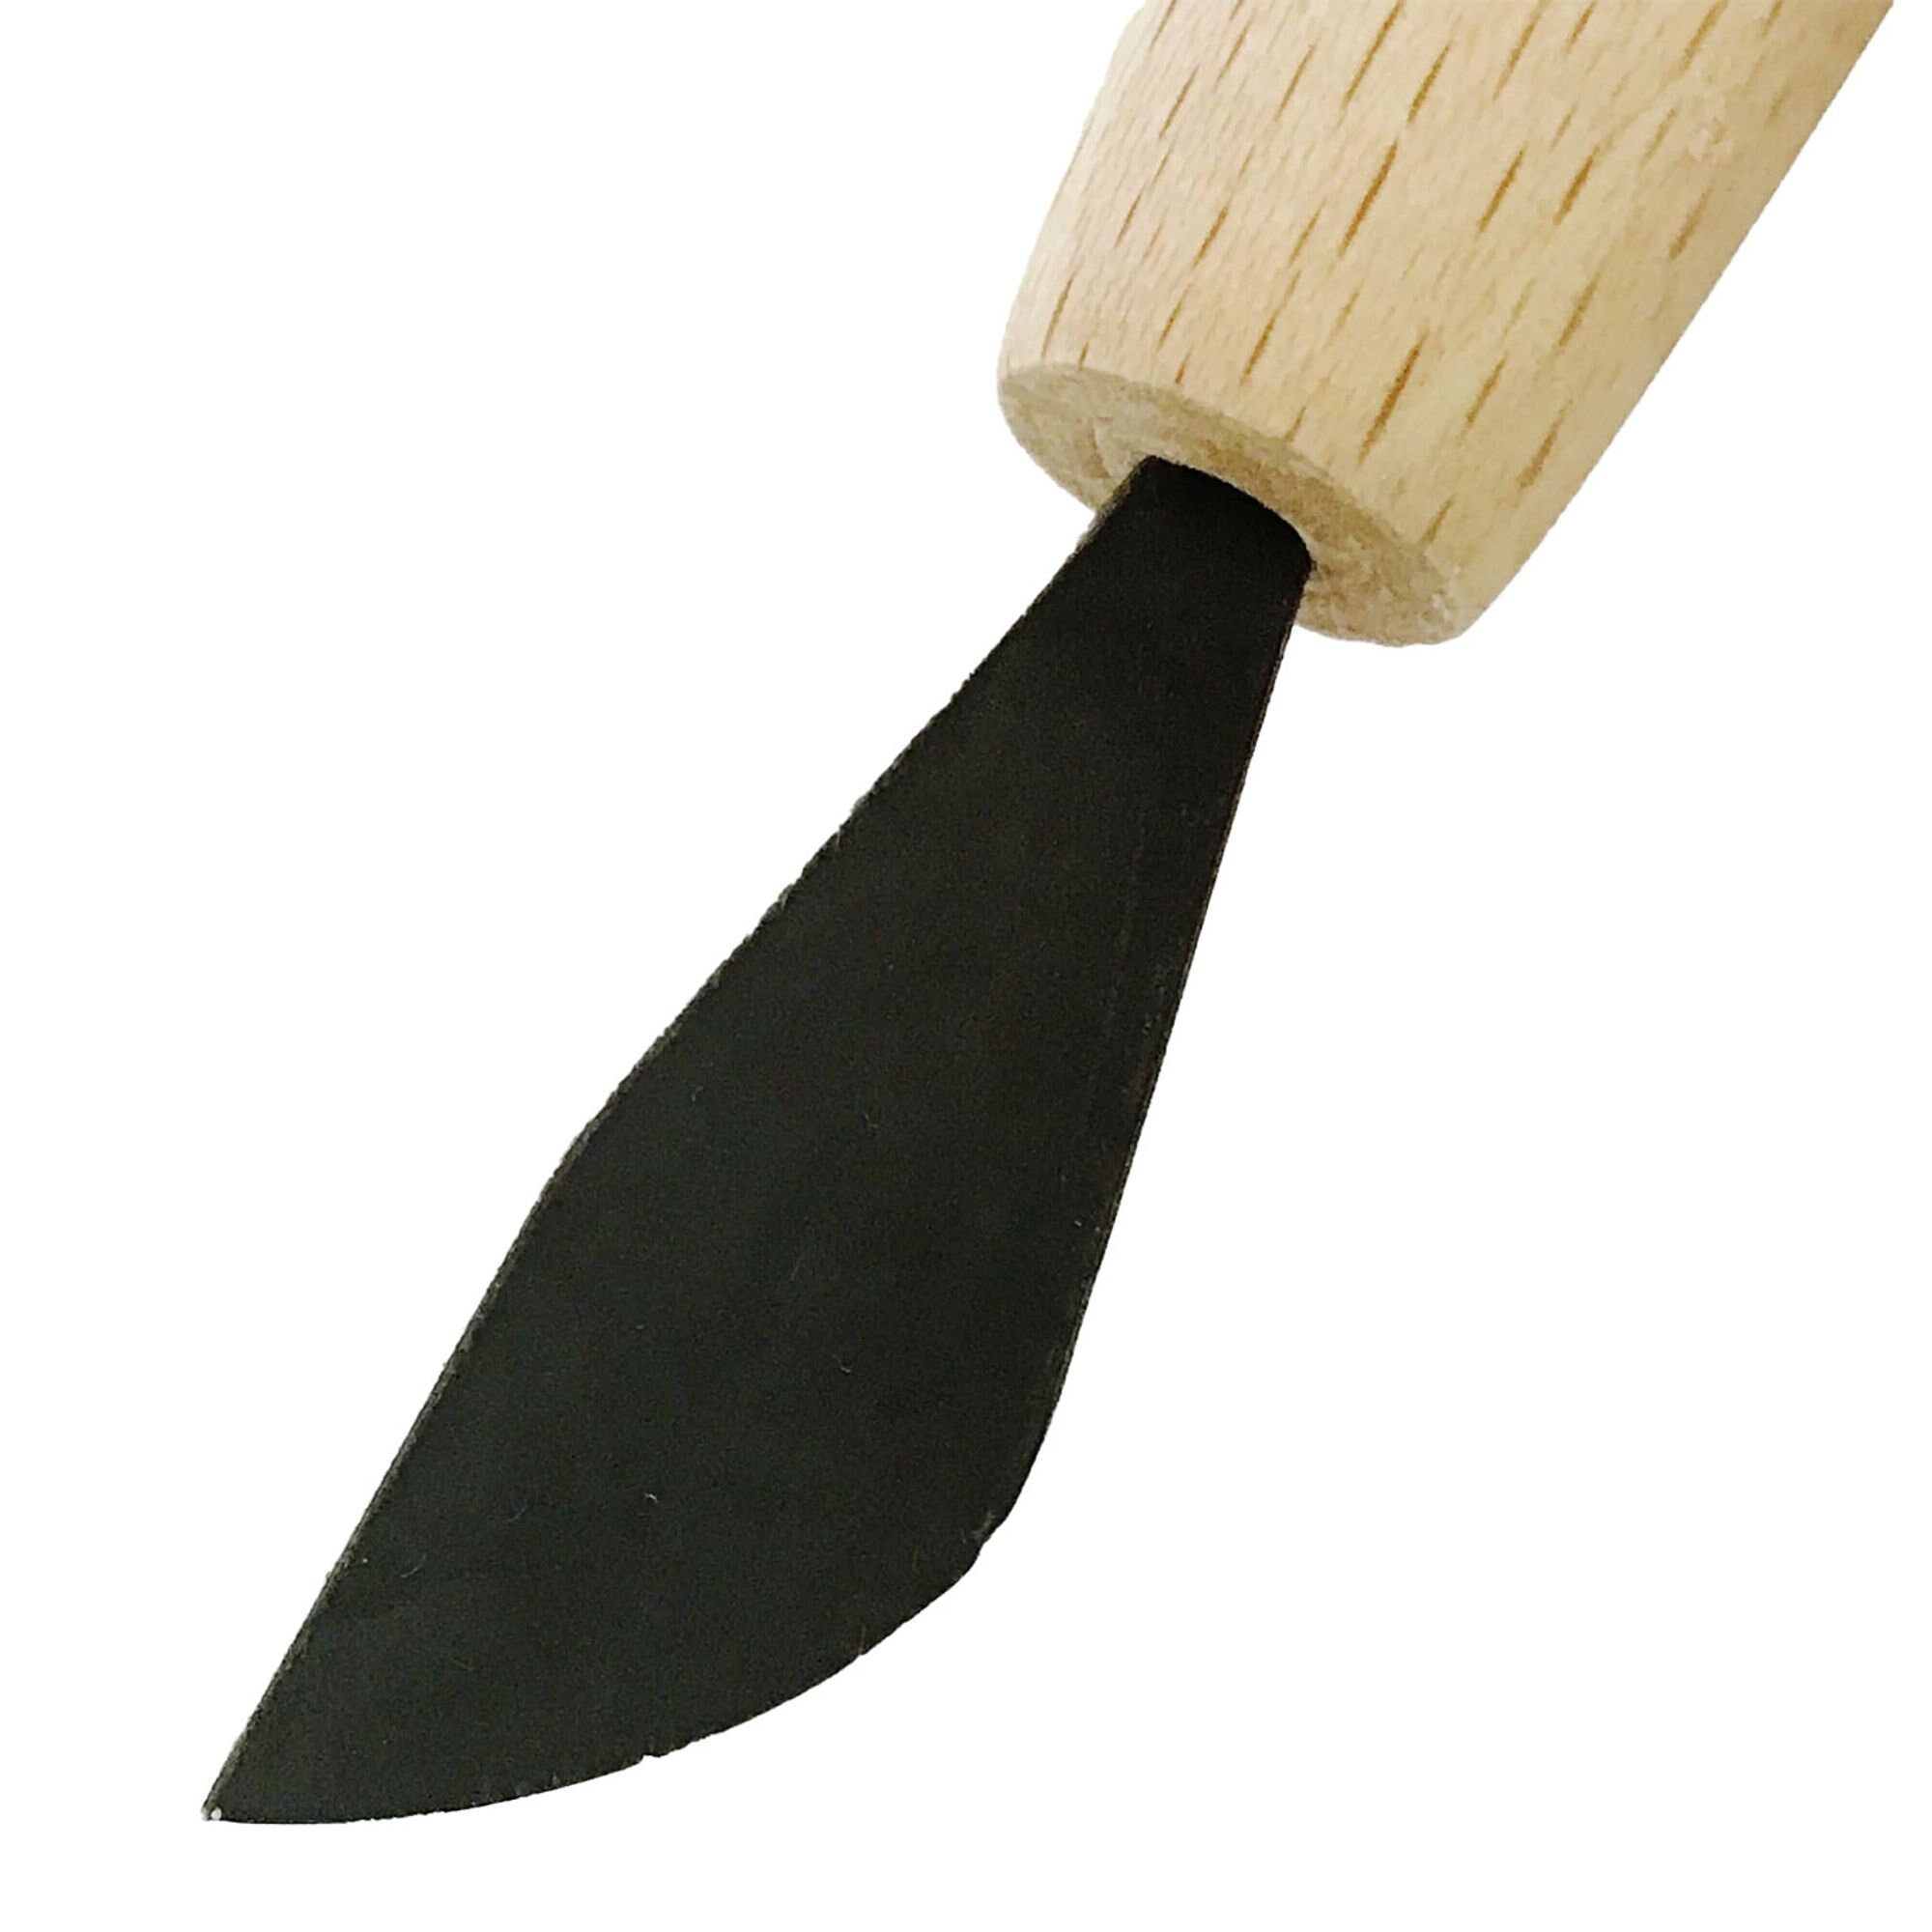 Michihamono Specialized Japanese Wood Carving Tool 35mm Double Bevel Whittling Knife, with High-Speed Steel Blade, for Woodworking